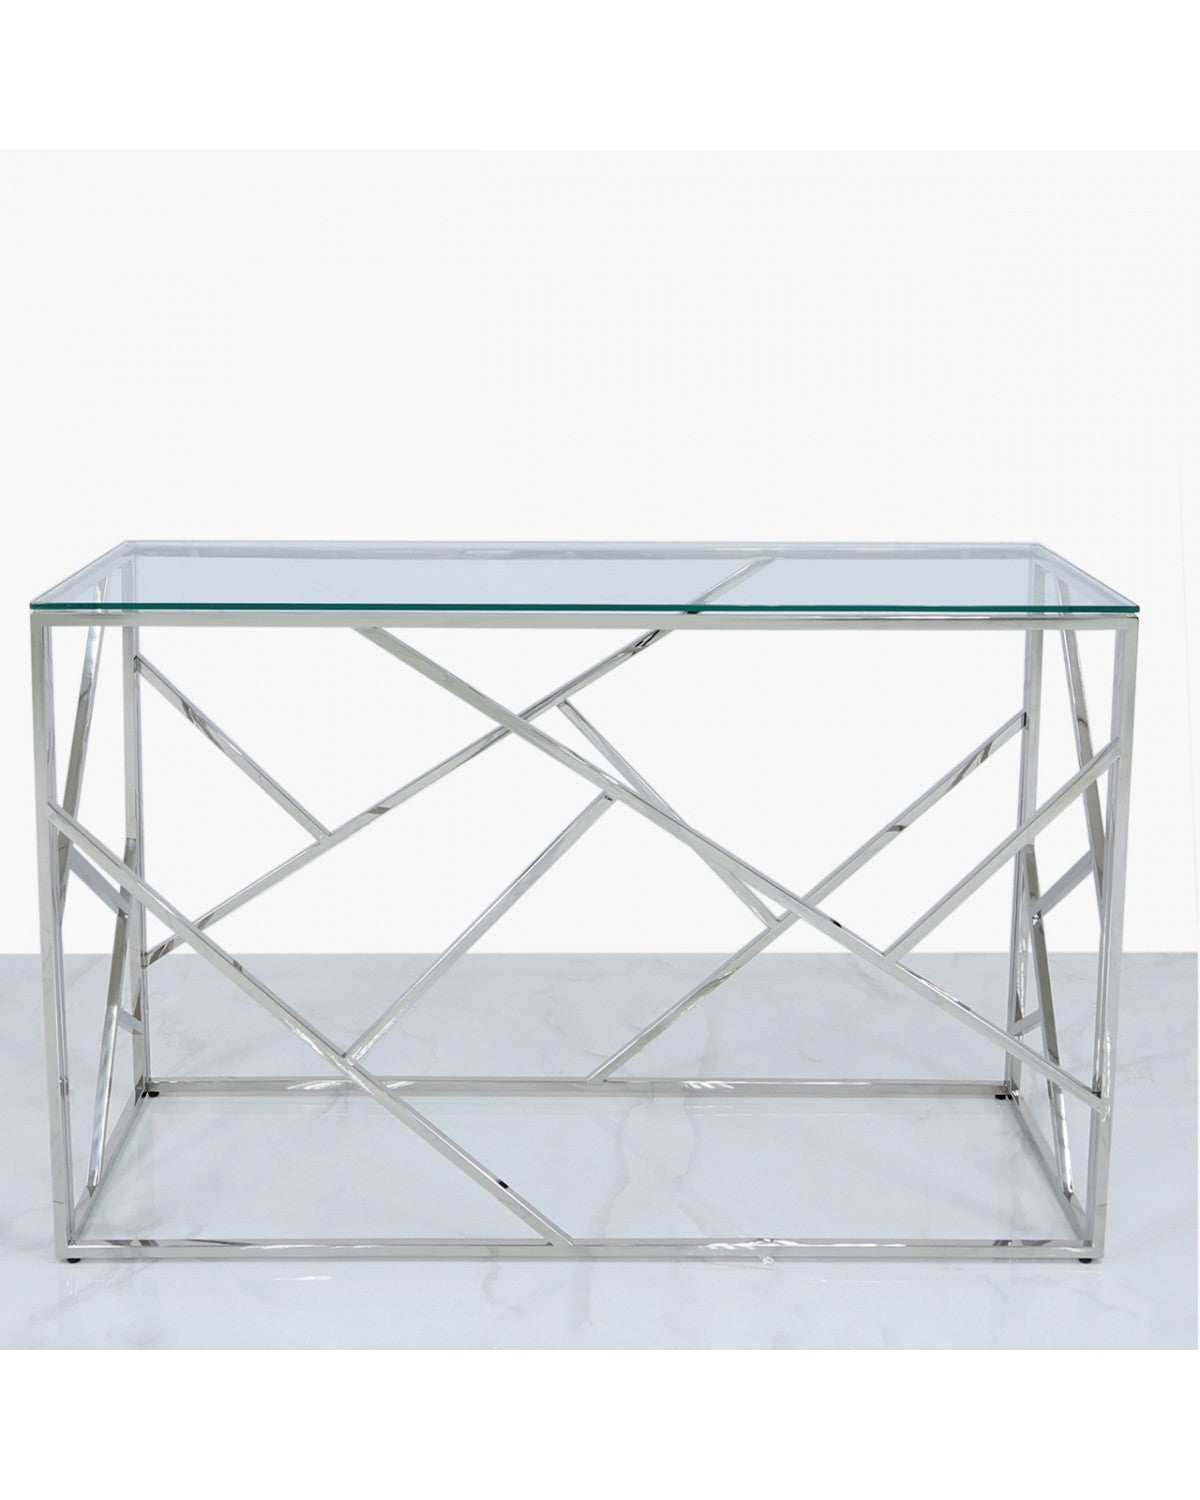 Deco Home Claudette Stainless Steel And Glass Console Table Hallway Table